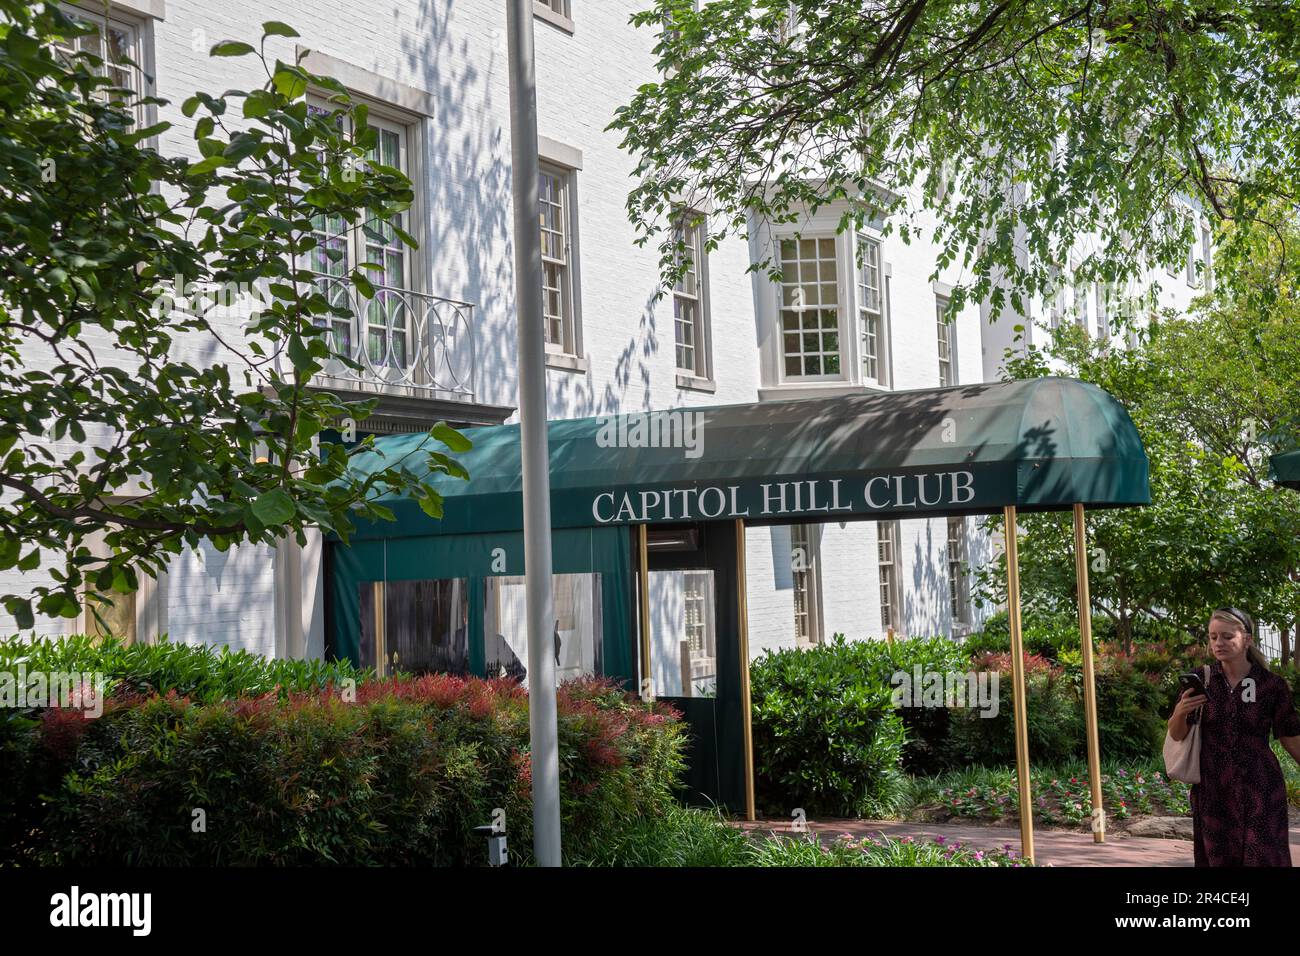 Washington, DC - The Capitol Hill Club, officially the National Republican Club of Capitol Hill. It is a private club, steps from the U.S. Capitol, fo Stock Photo